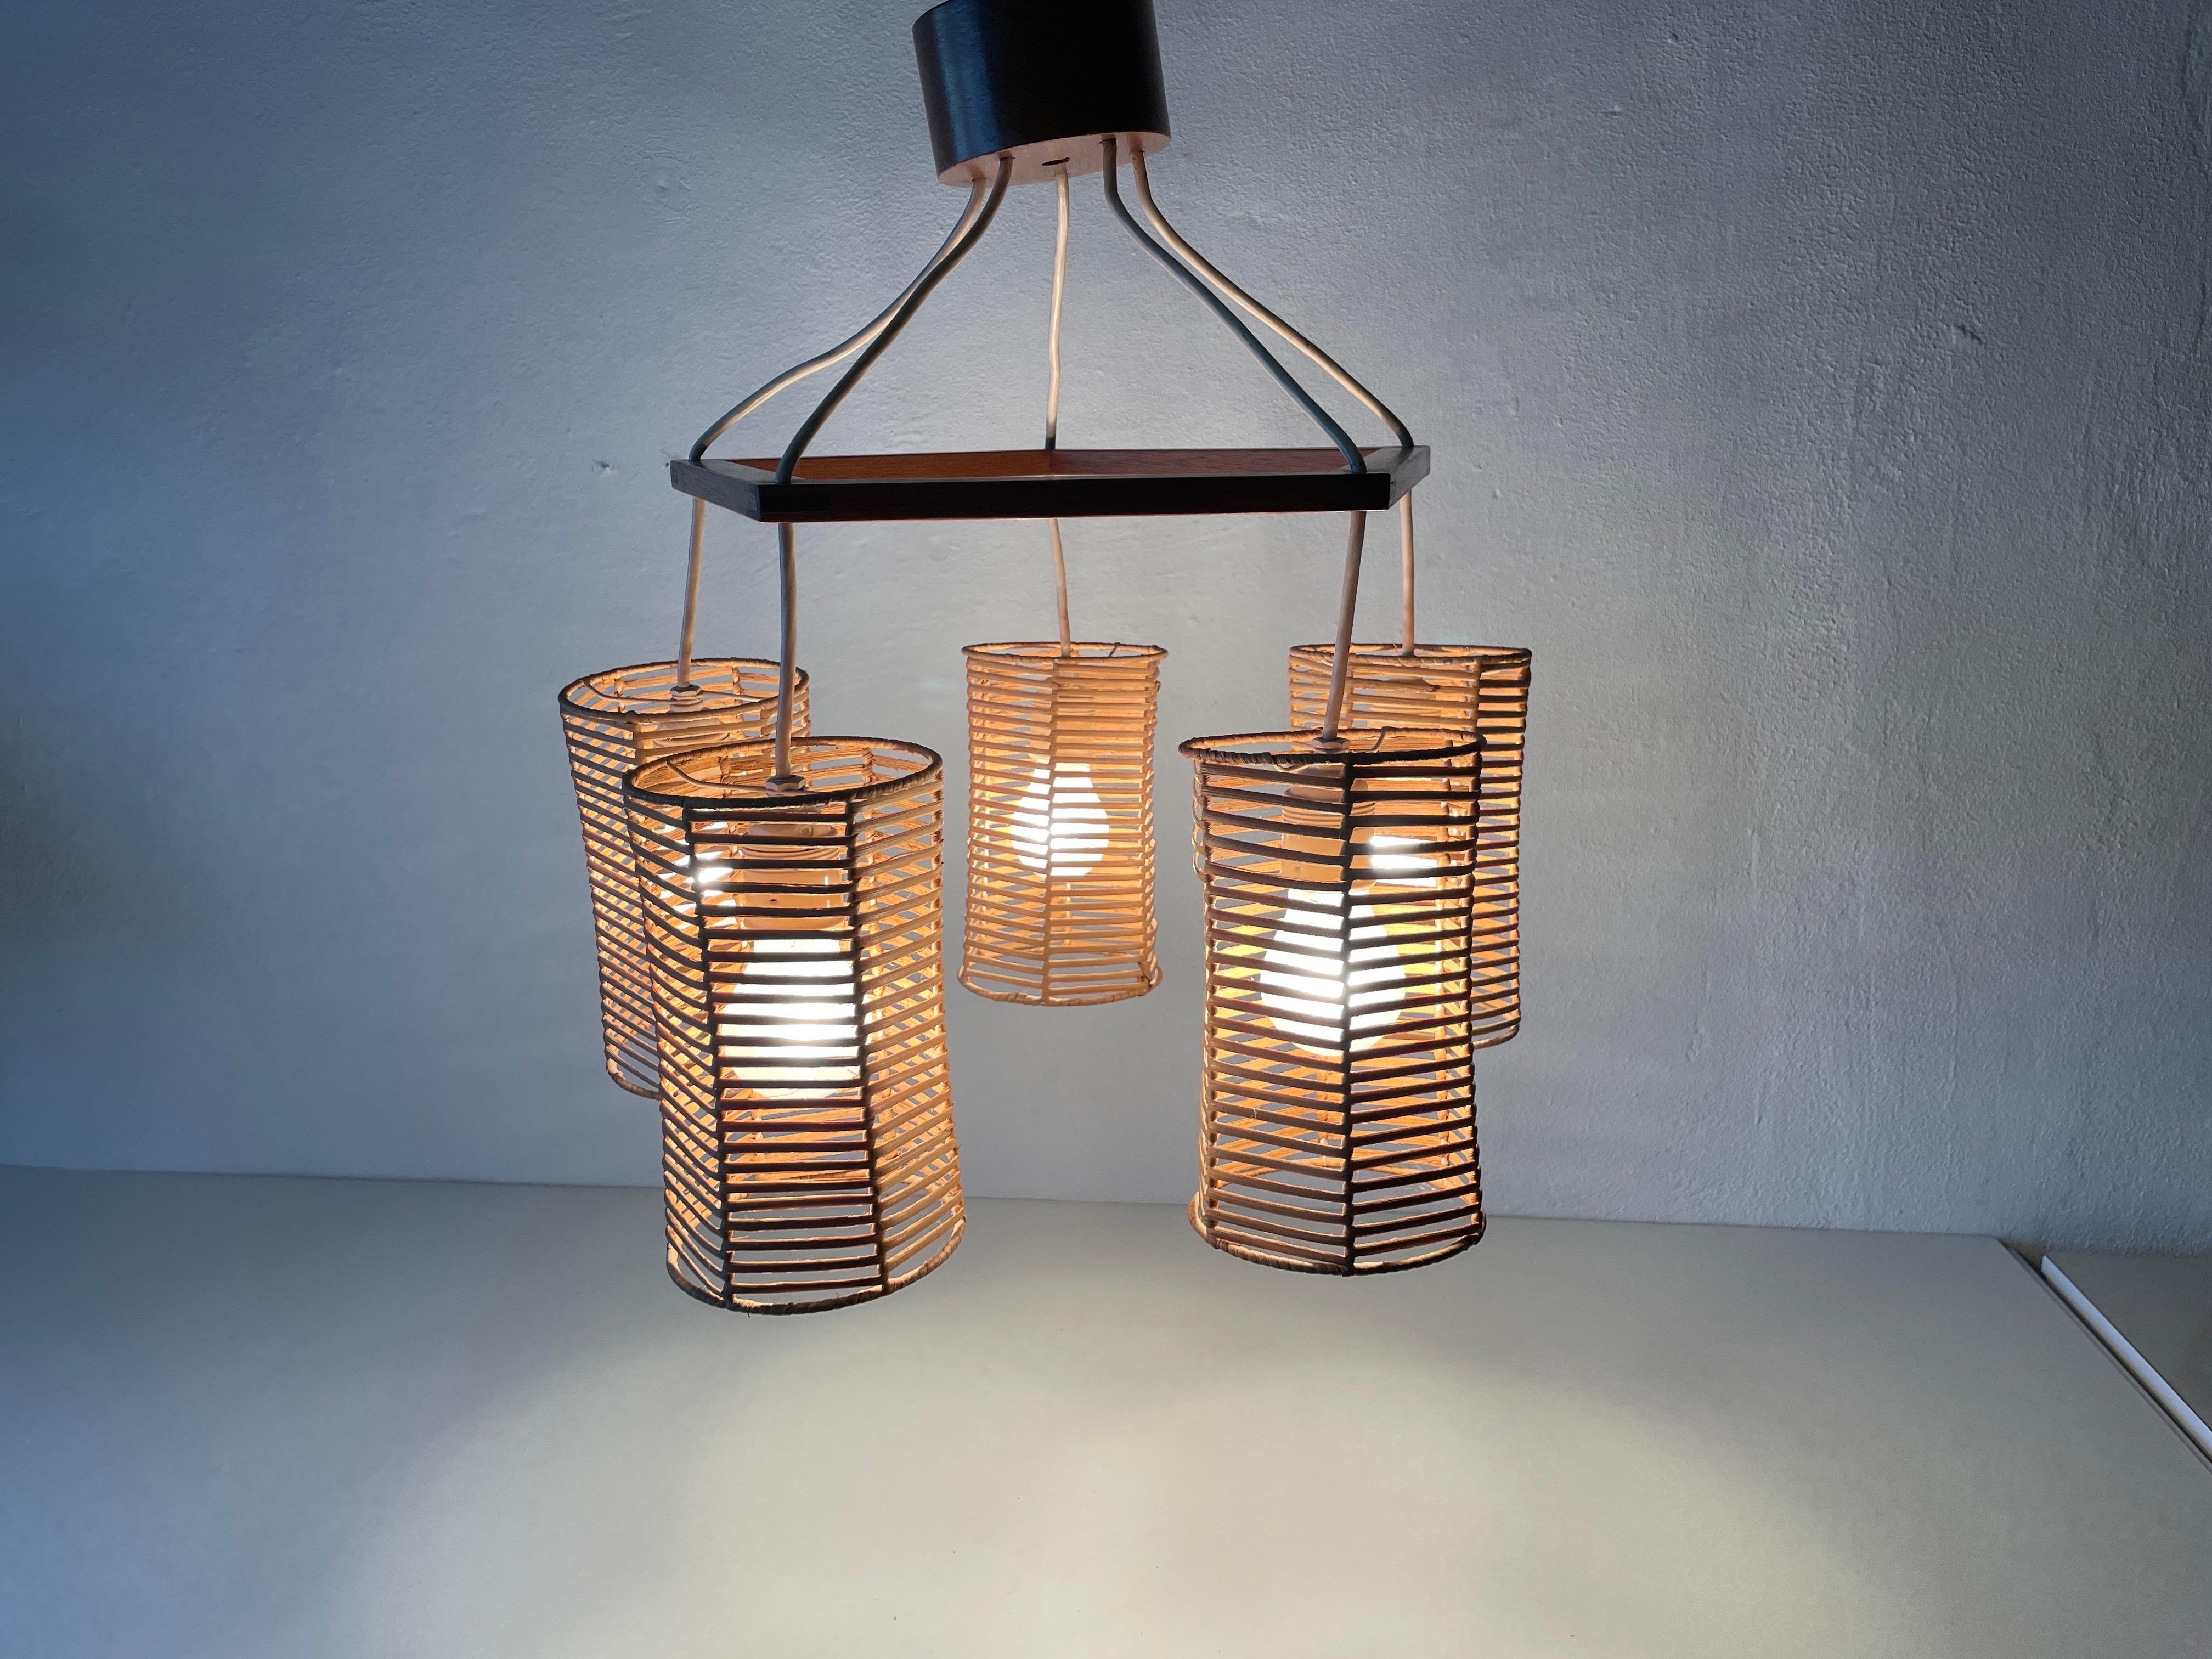 5-head Wicker and Wood Pendant Lamp, 1960s, Germany For Sale 5